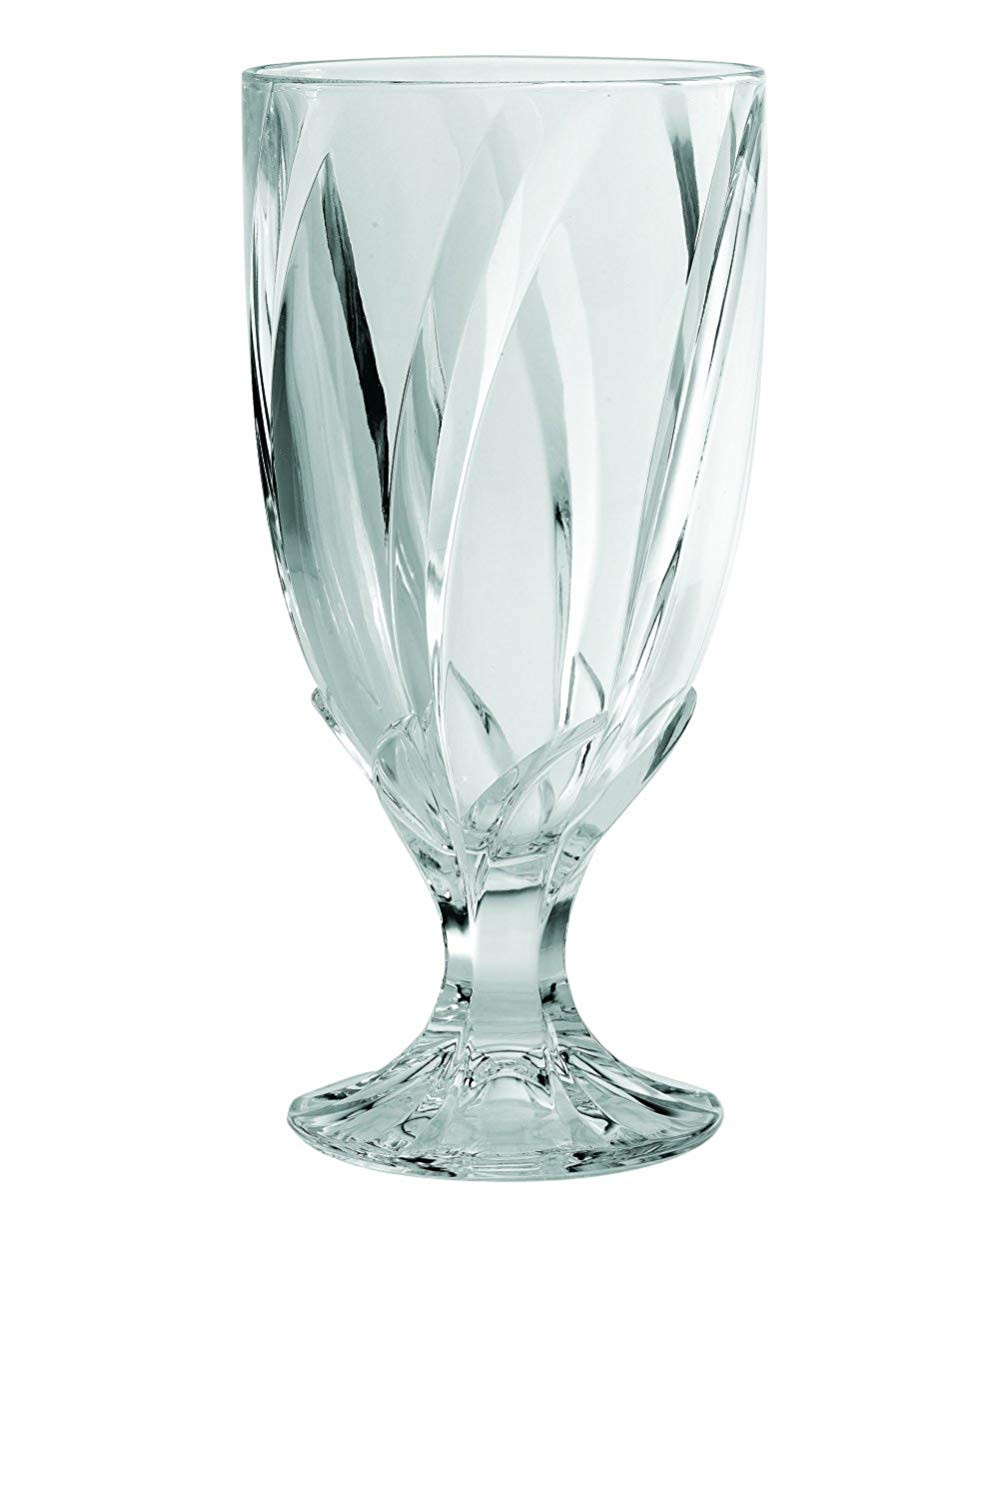 17 attractive noritake Crystal Vase 2024 free download noritake crystal vase of amazon com noritake set of 4 breeze iced tea glasses clear 16 oz intended for amazon com noritake set of 4 breeze iced tea glasses clear 16 oz colorful tea glasses i